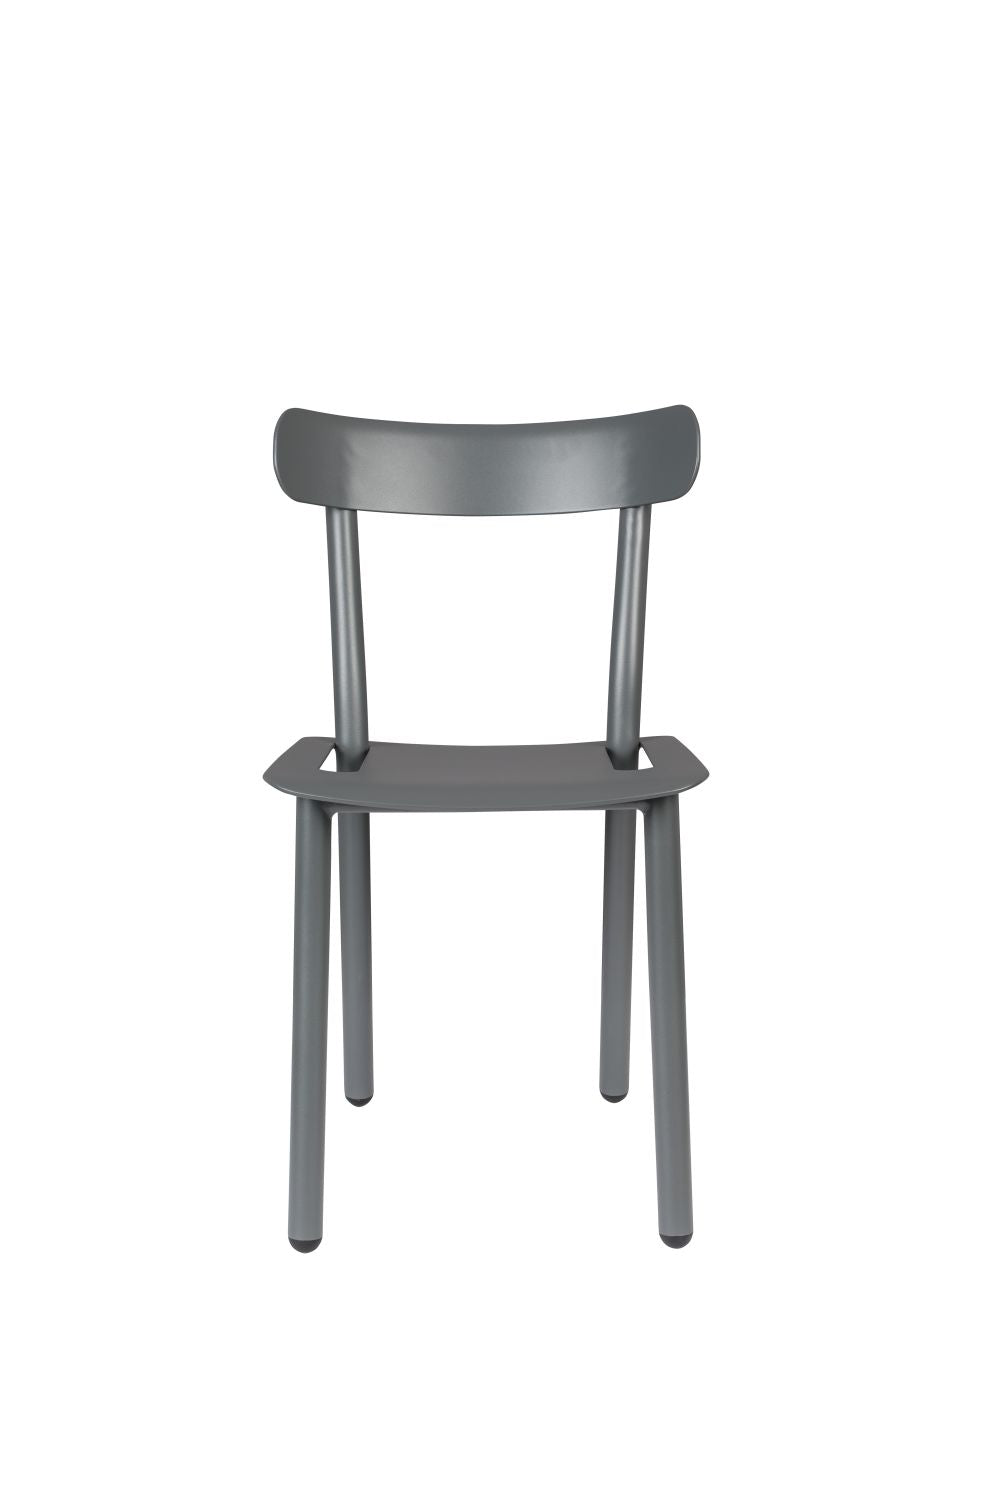  Zuiver-Zuiver Set of 2 Friday Garden Chairs Grey-Grey 37 